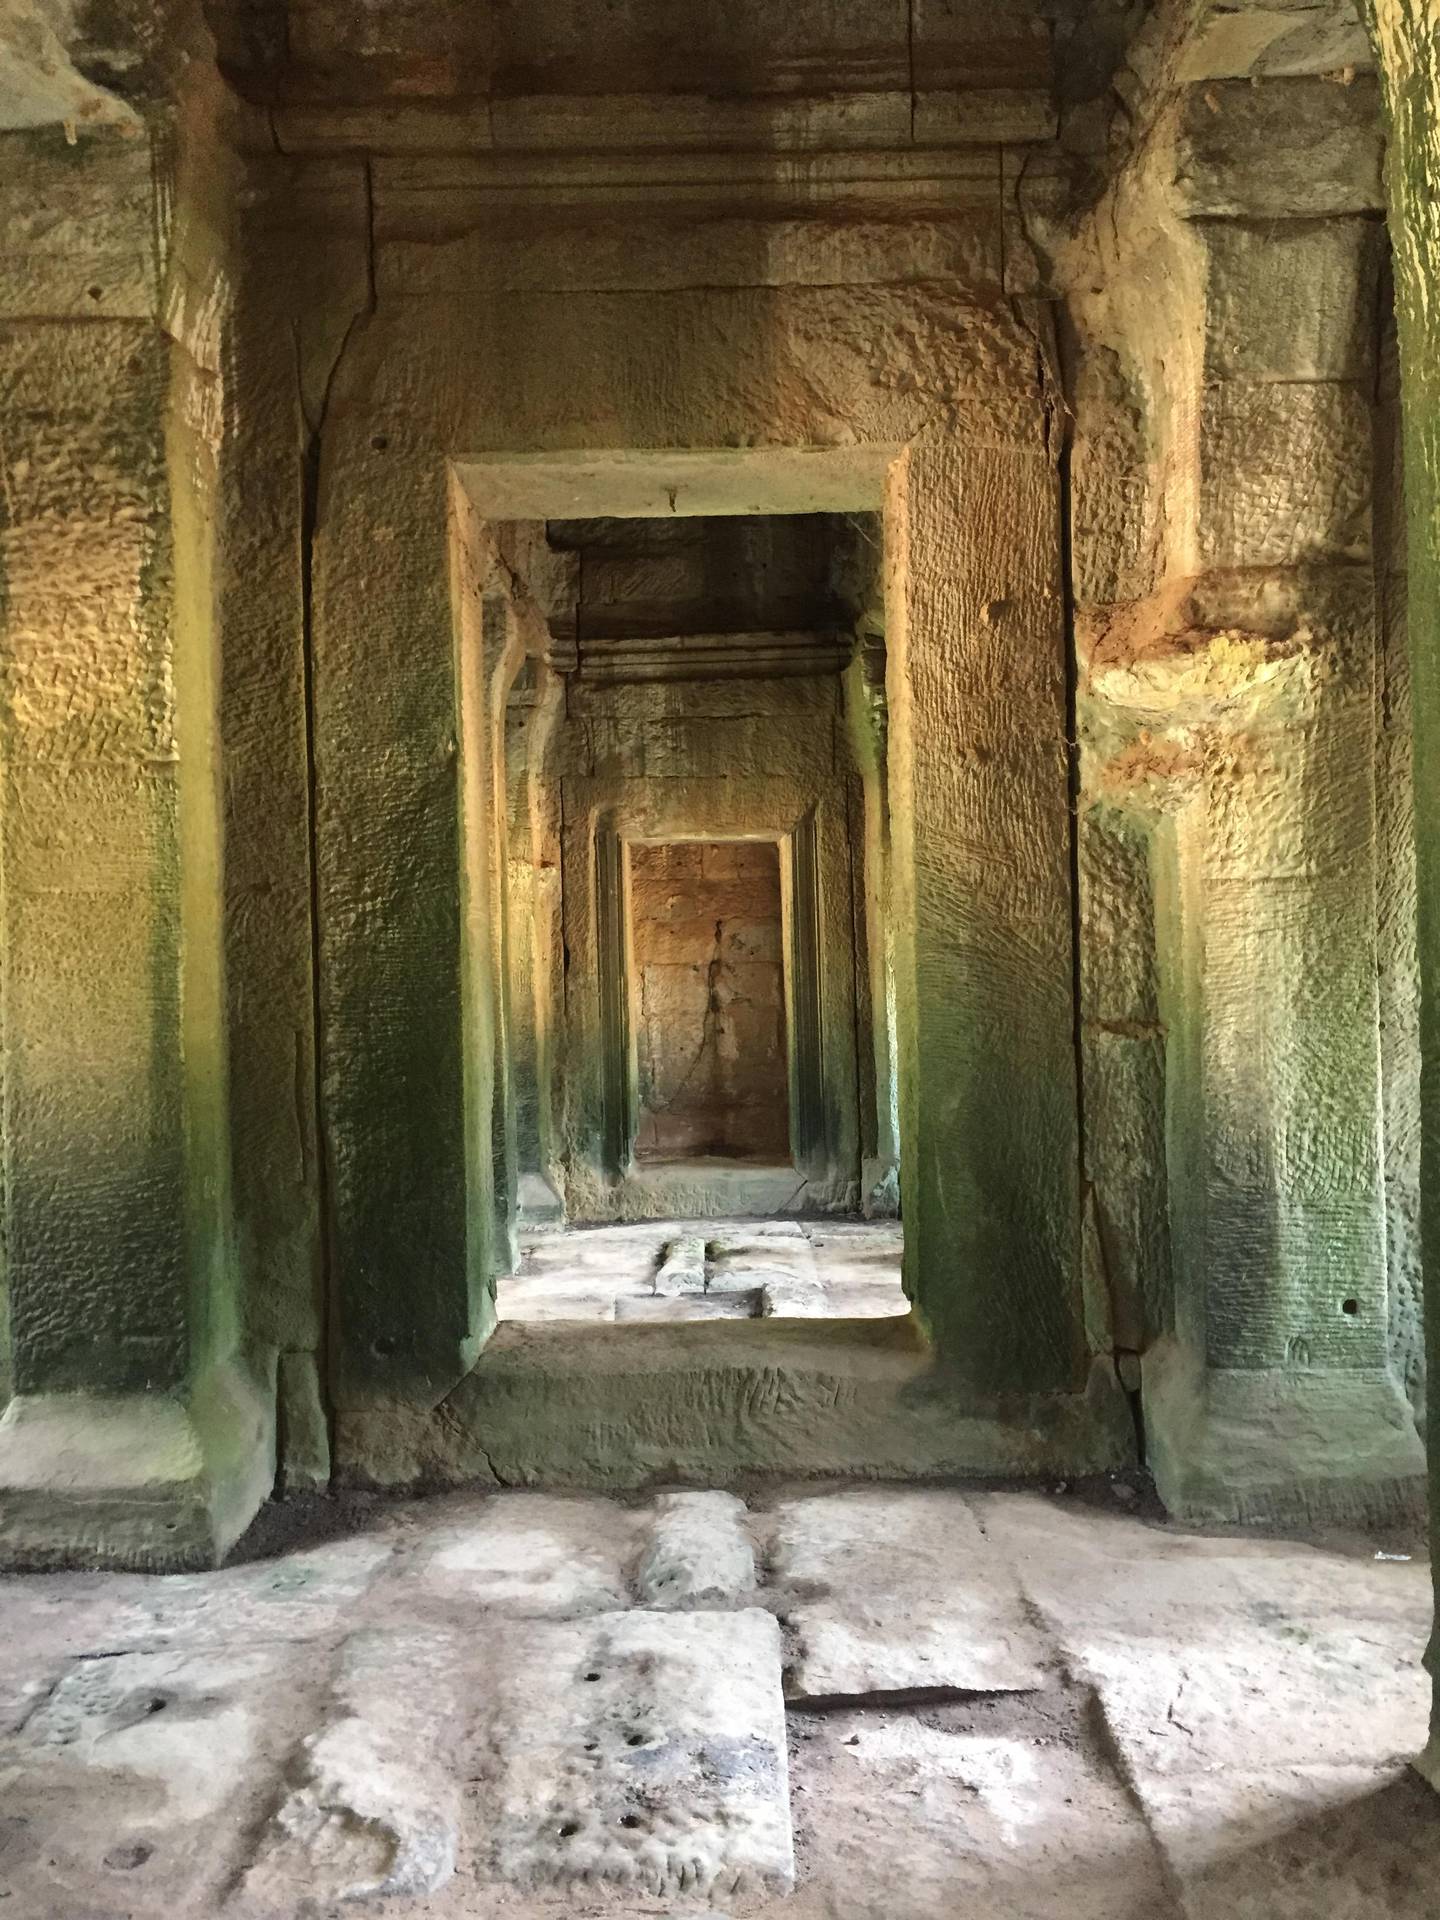 Wandering inside the historic temples of Angkor. Rosemary Behan